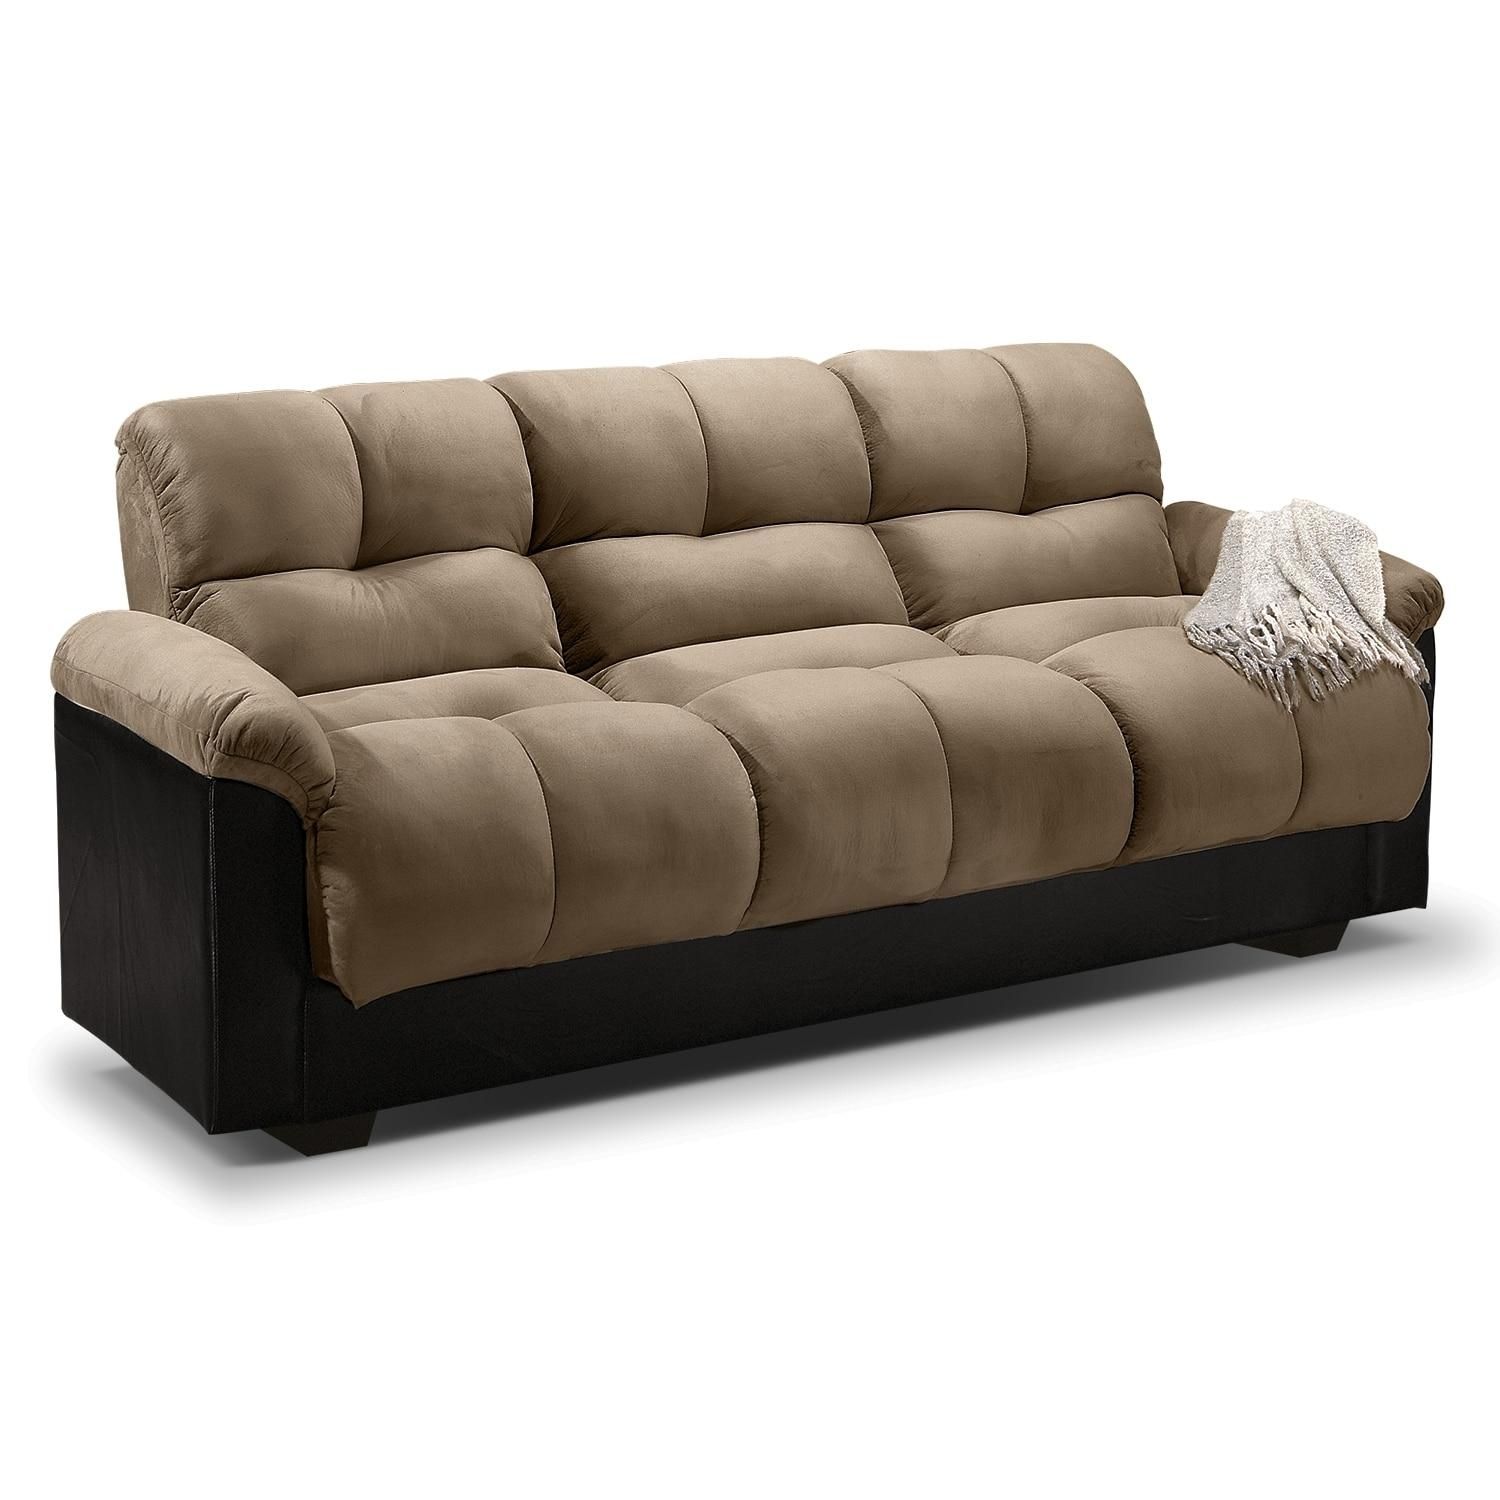 Futons | Living Room Seating | Value City Furniture Regarding Leather Sofa Beds With Storage (Photo 20 of 20)